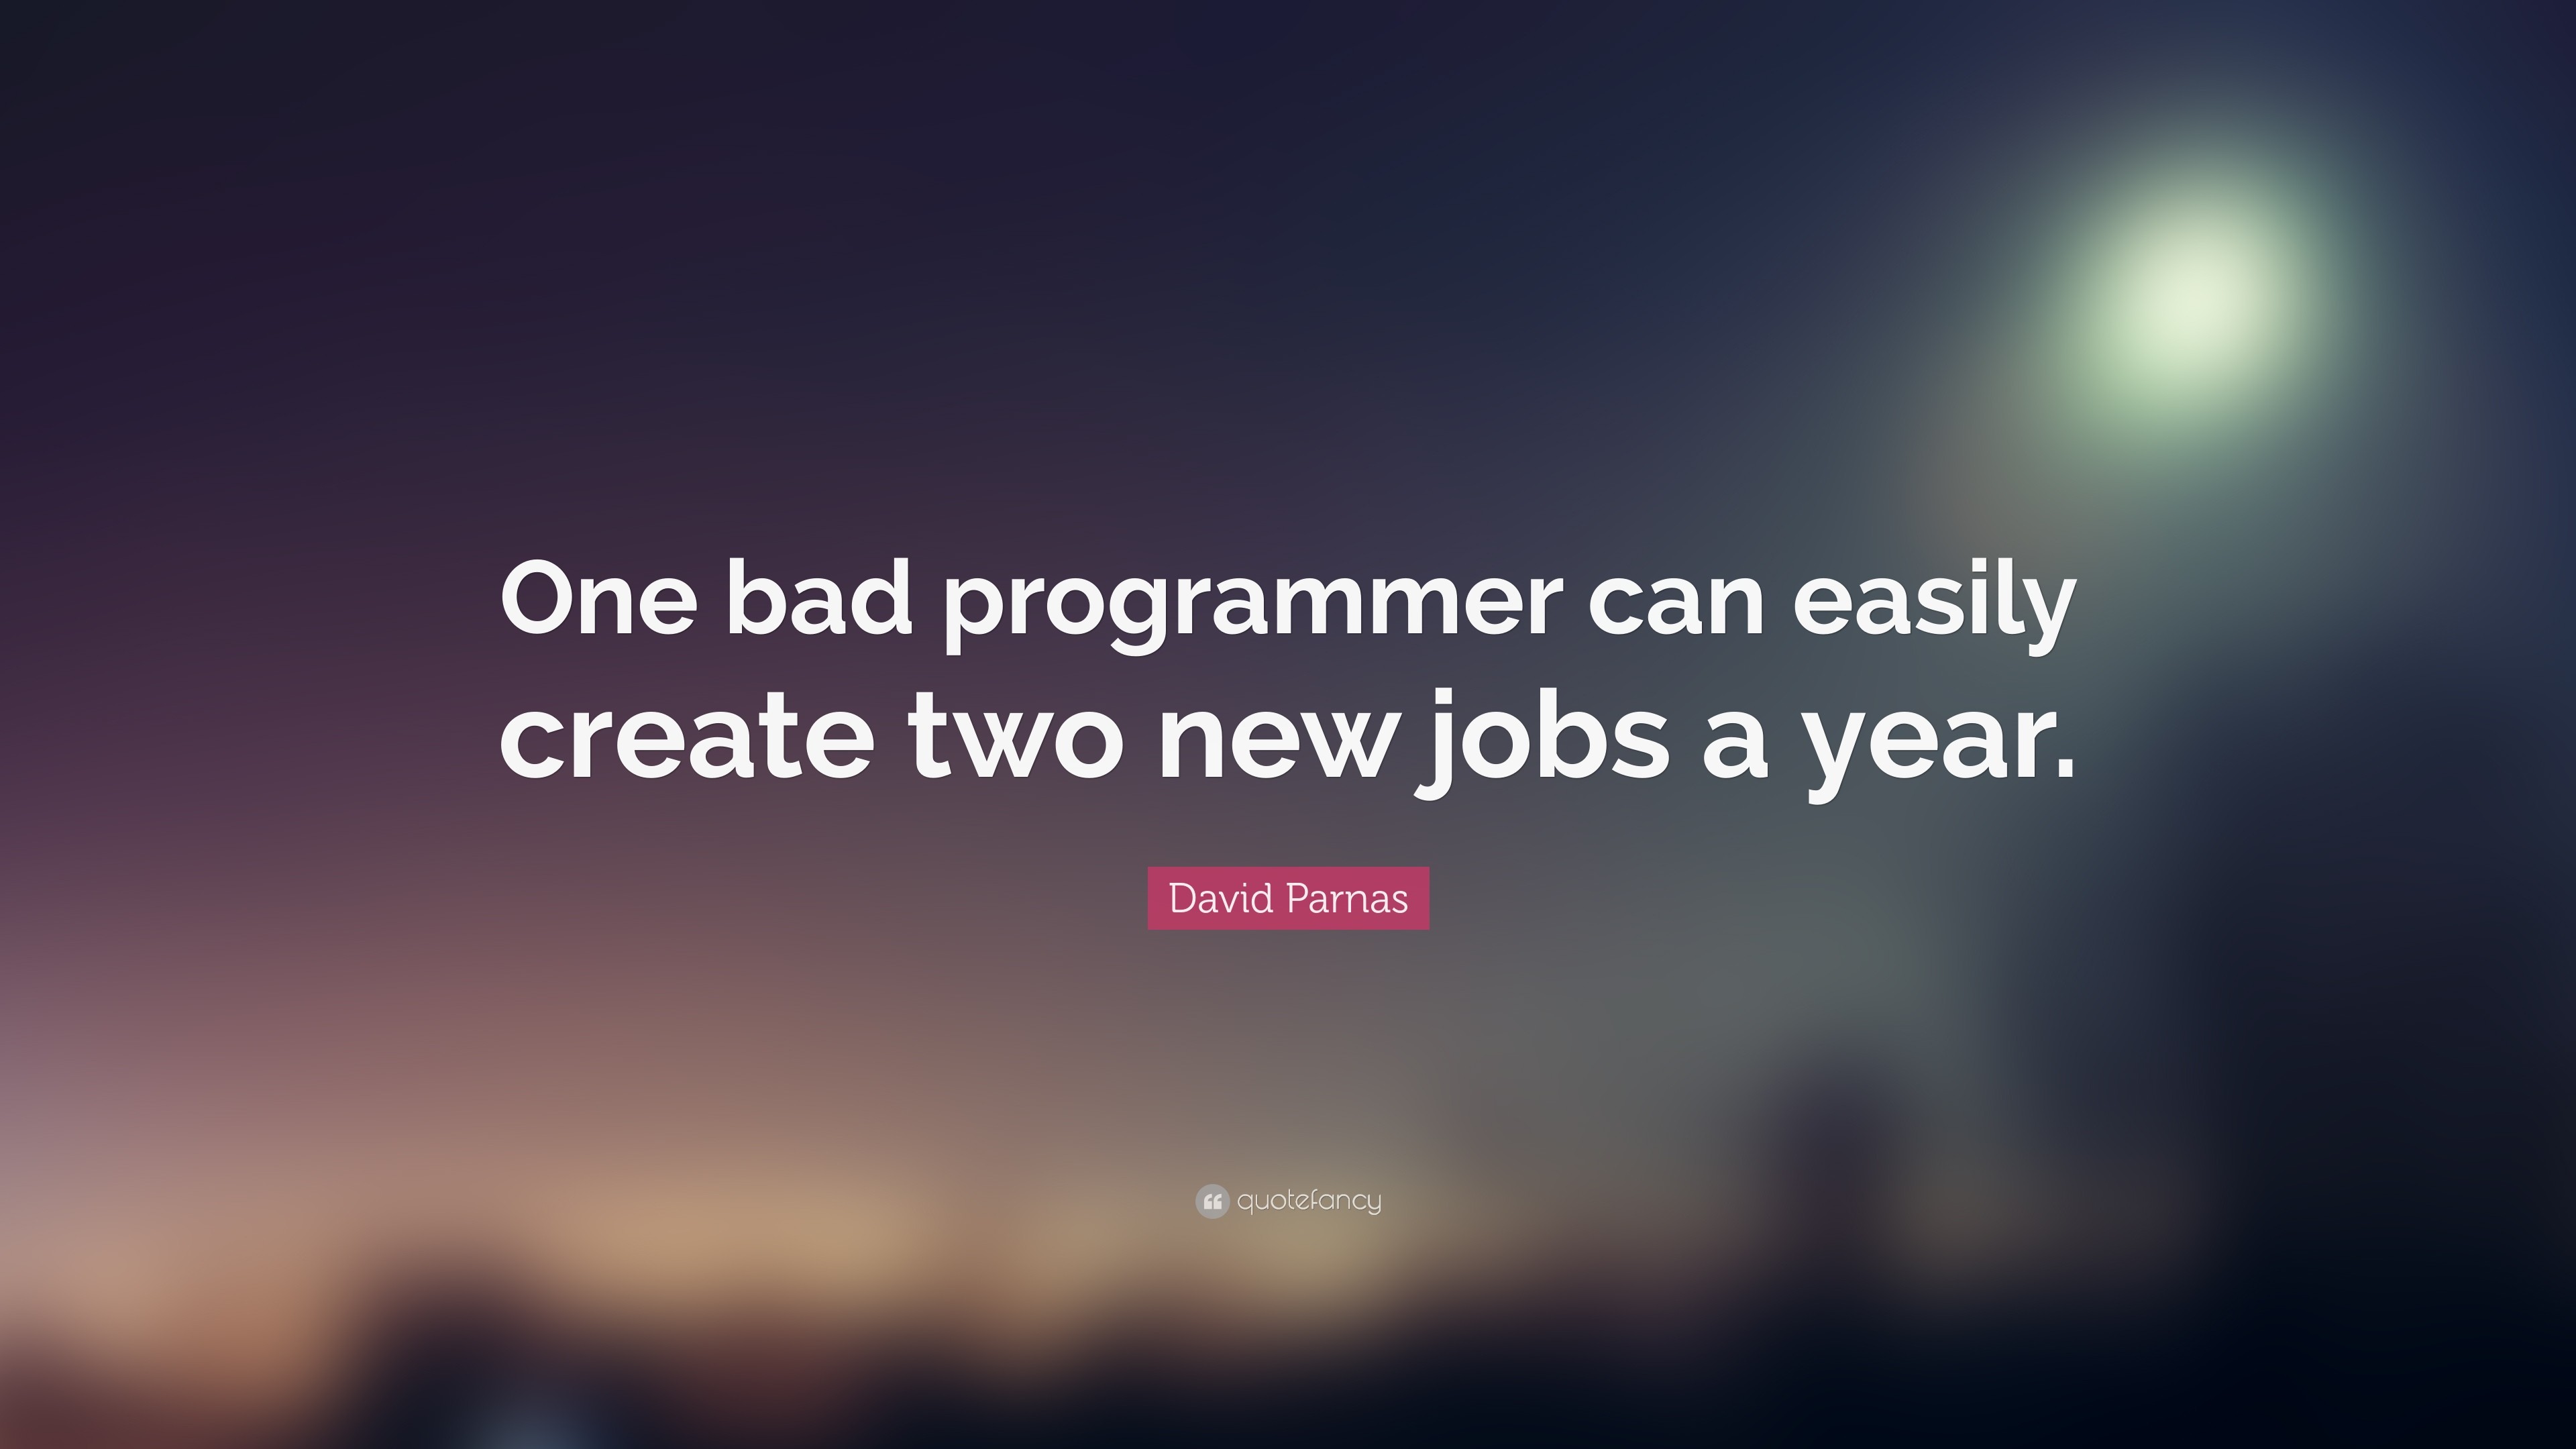 3840x2160 David Parnas Quote: “One bad programmer can easily create two new jobs a  year